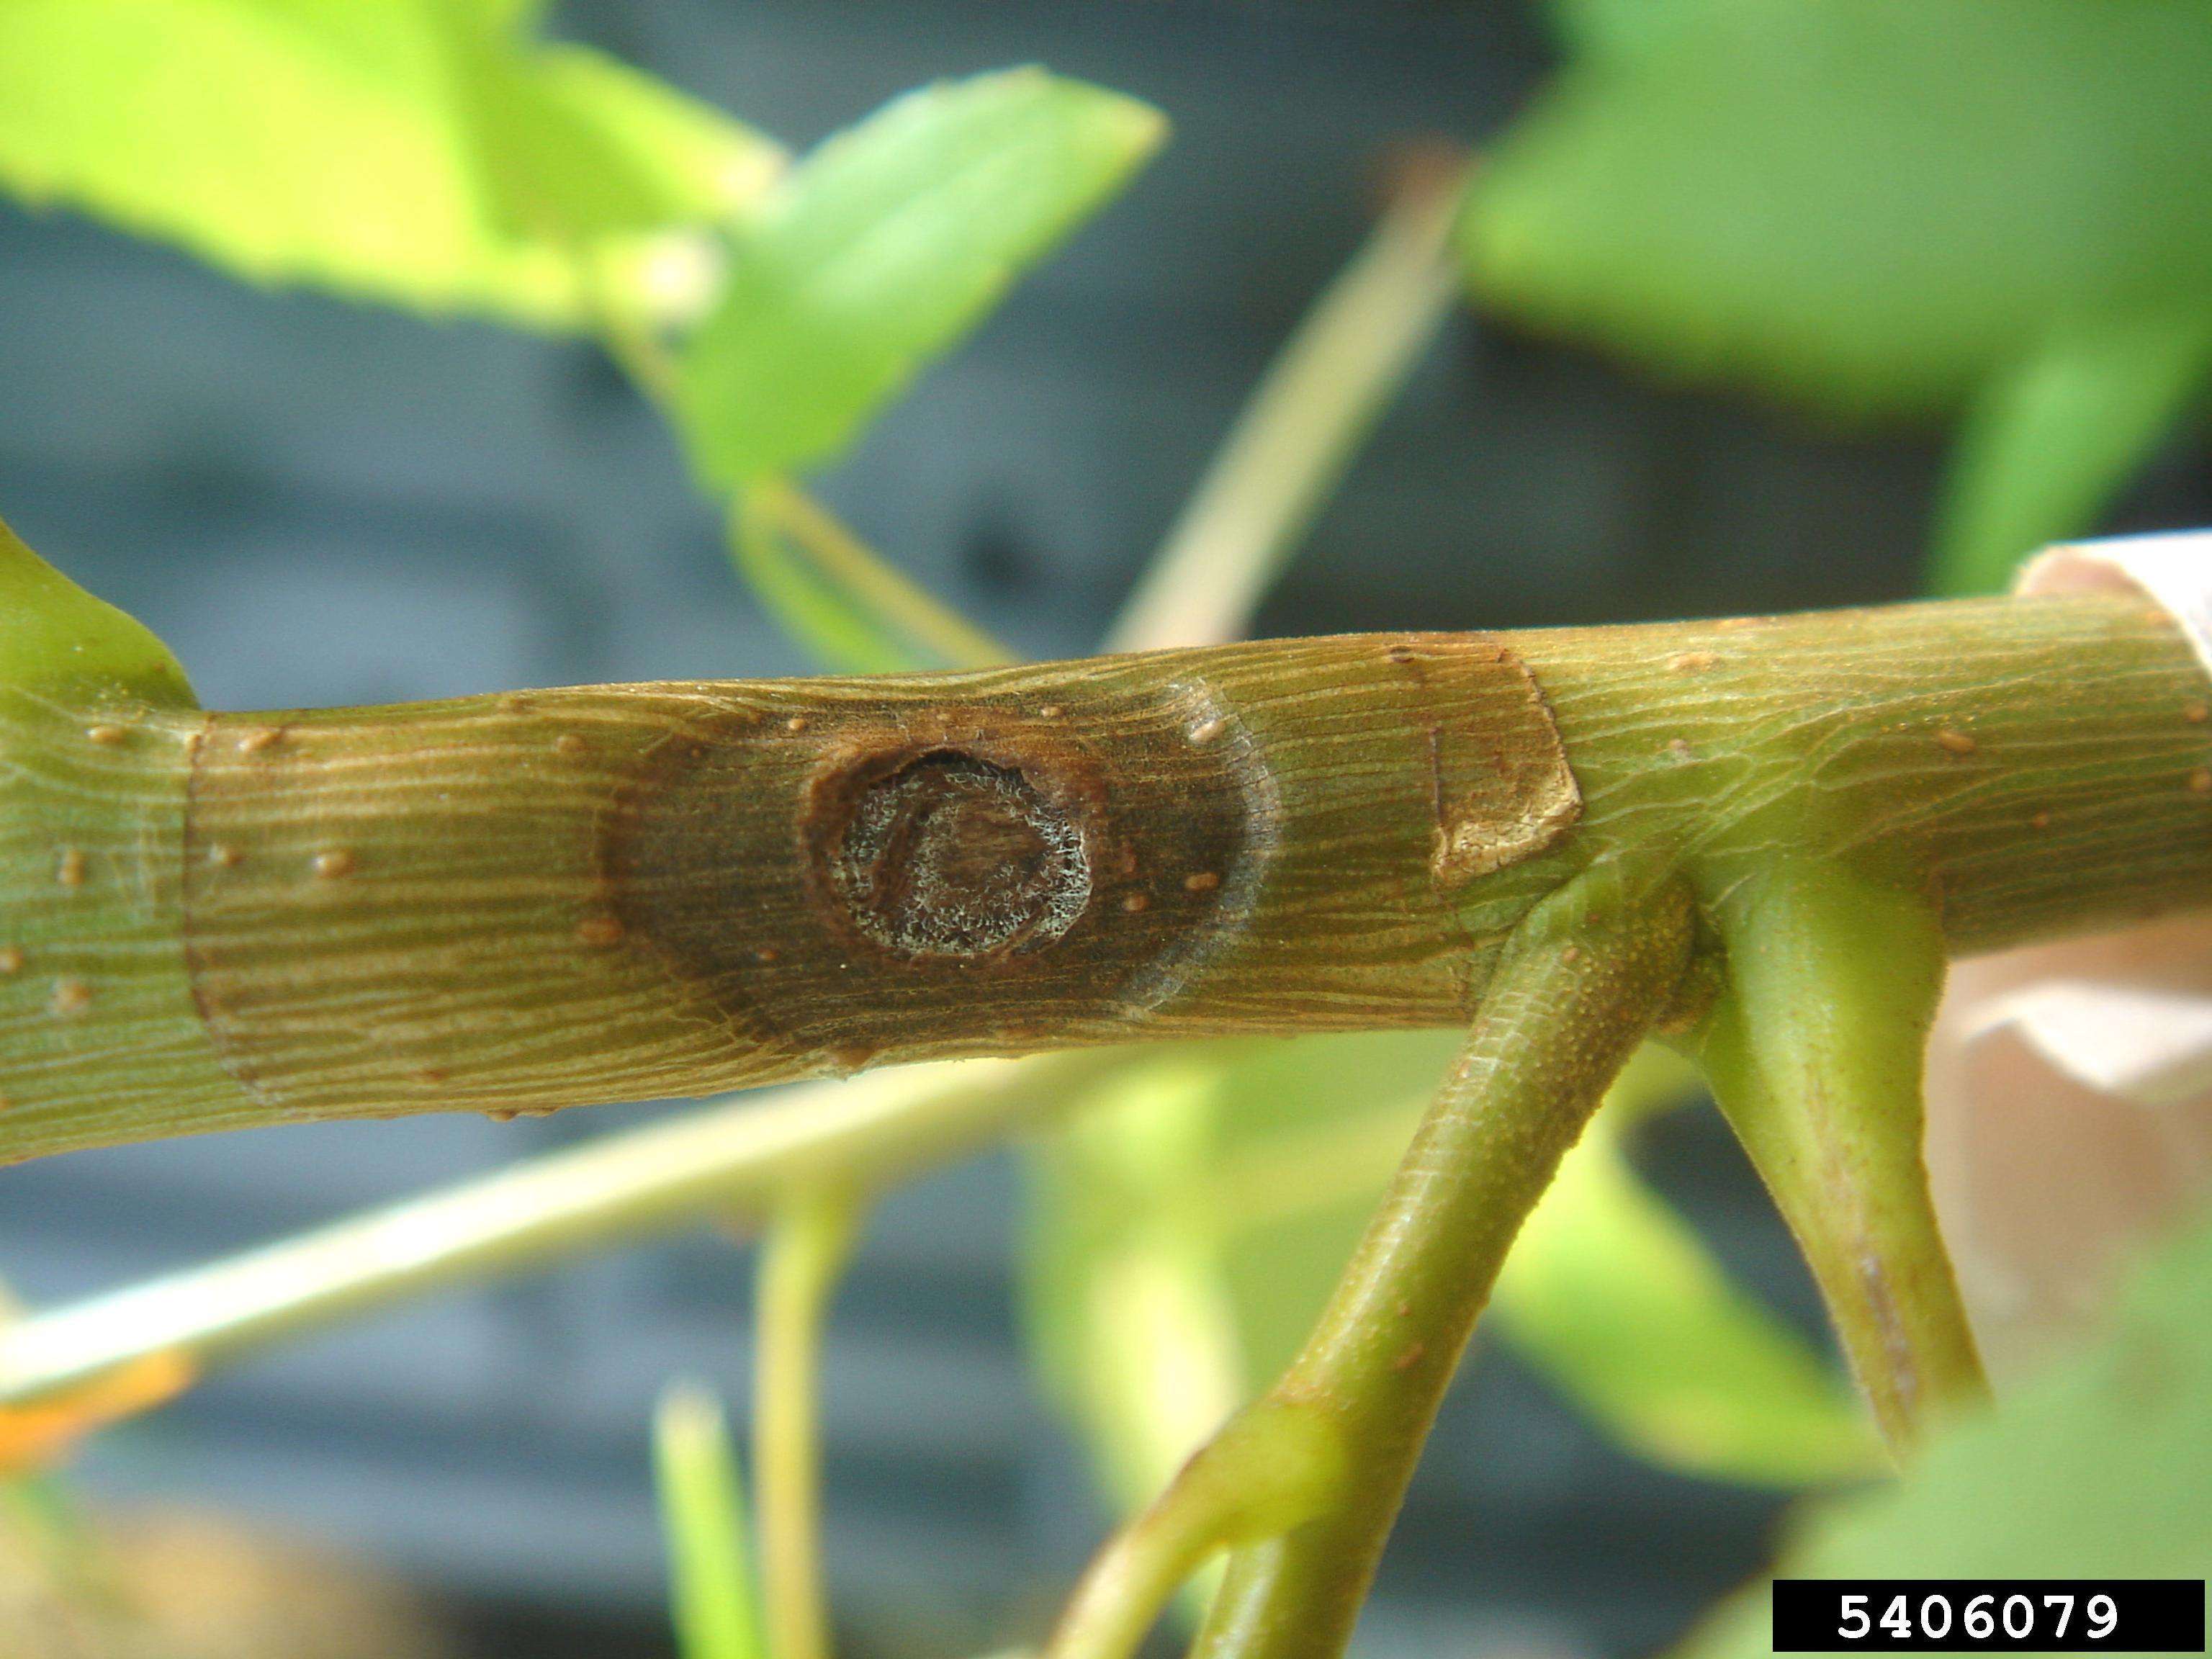 Canker on a Southern California walnut seedling; canker is circular and dark amber in color with fungus spores at the outer edges of the canker wound.